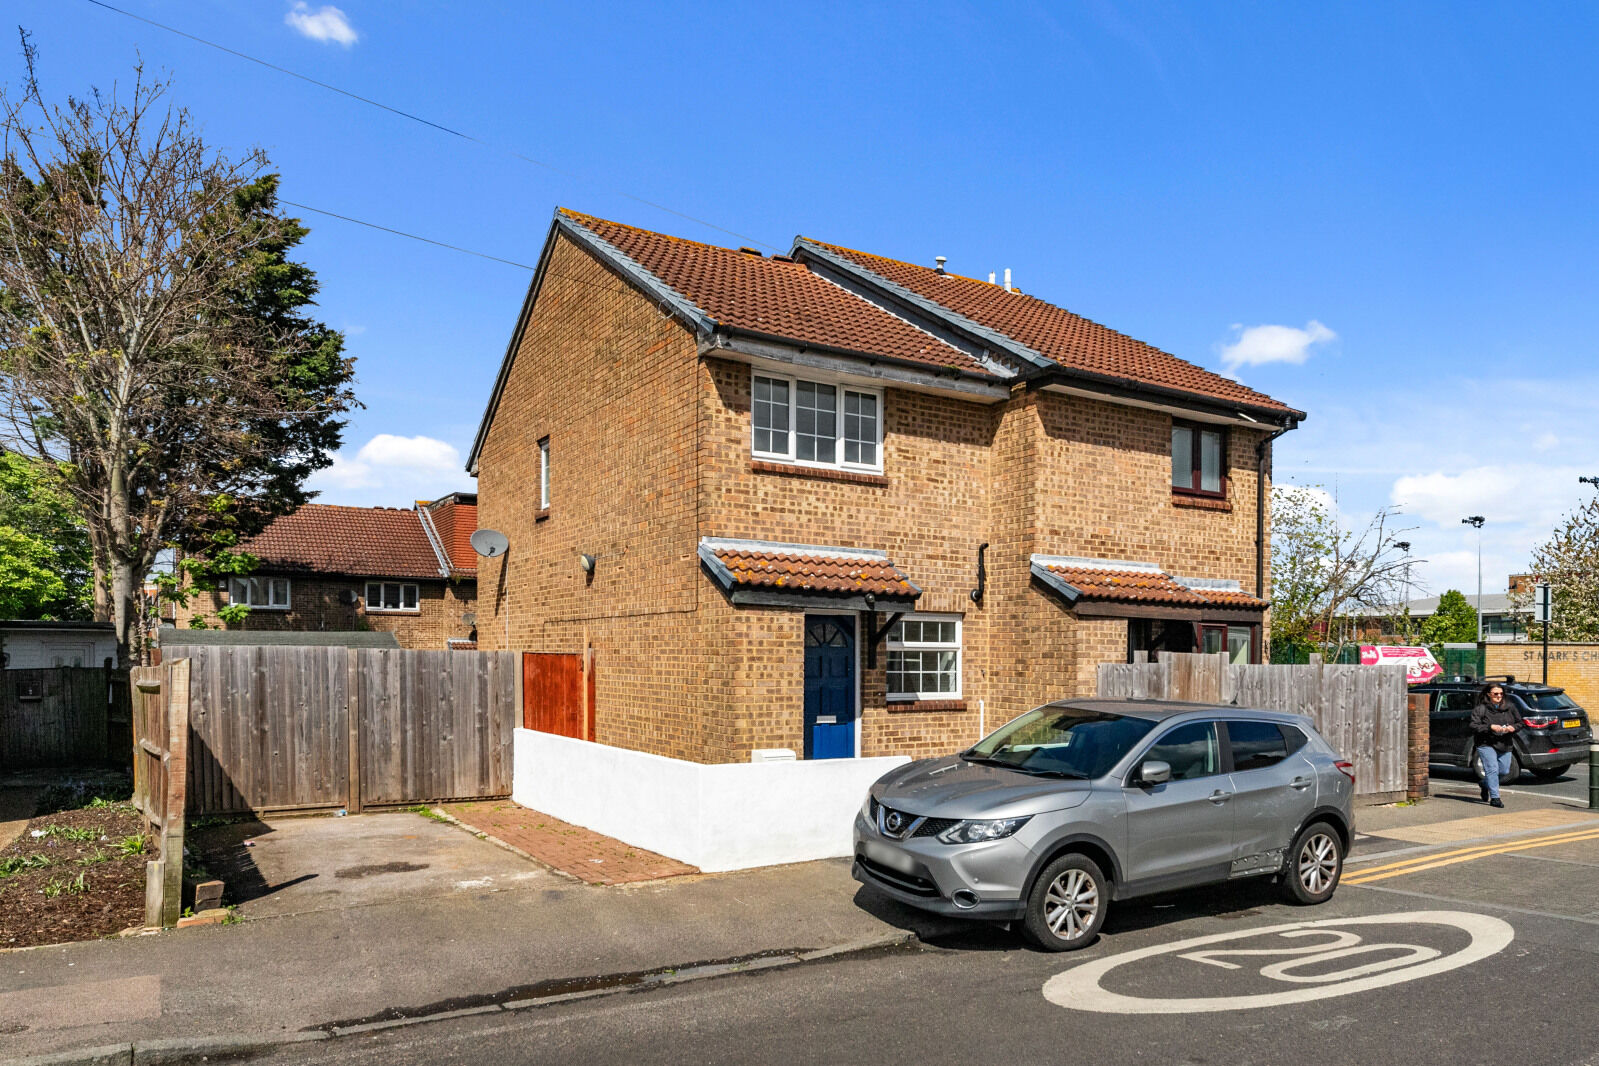 2 bedroom semi detached house to rent, Available now Acacia Road, Mitcham, CR4, main image